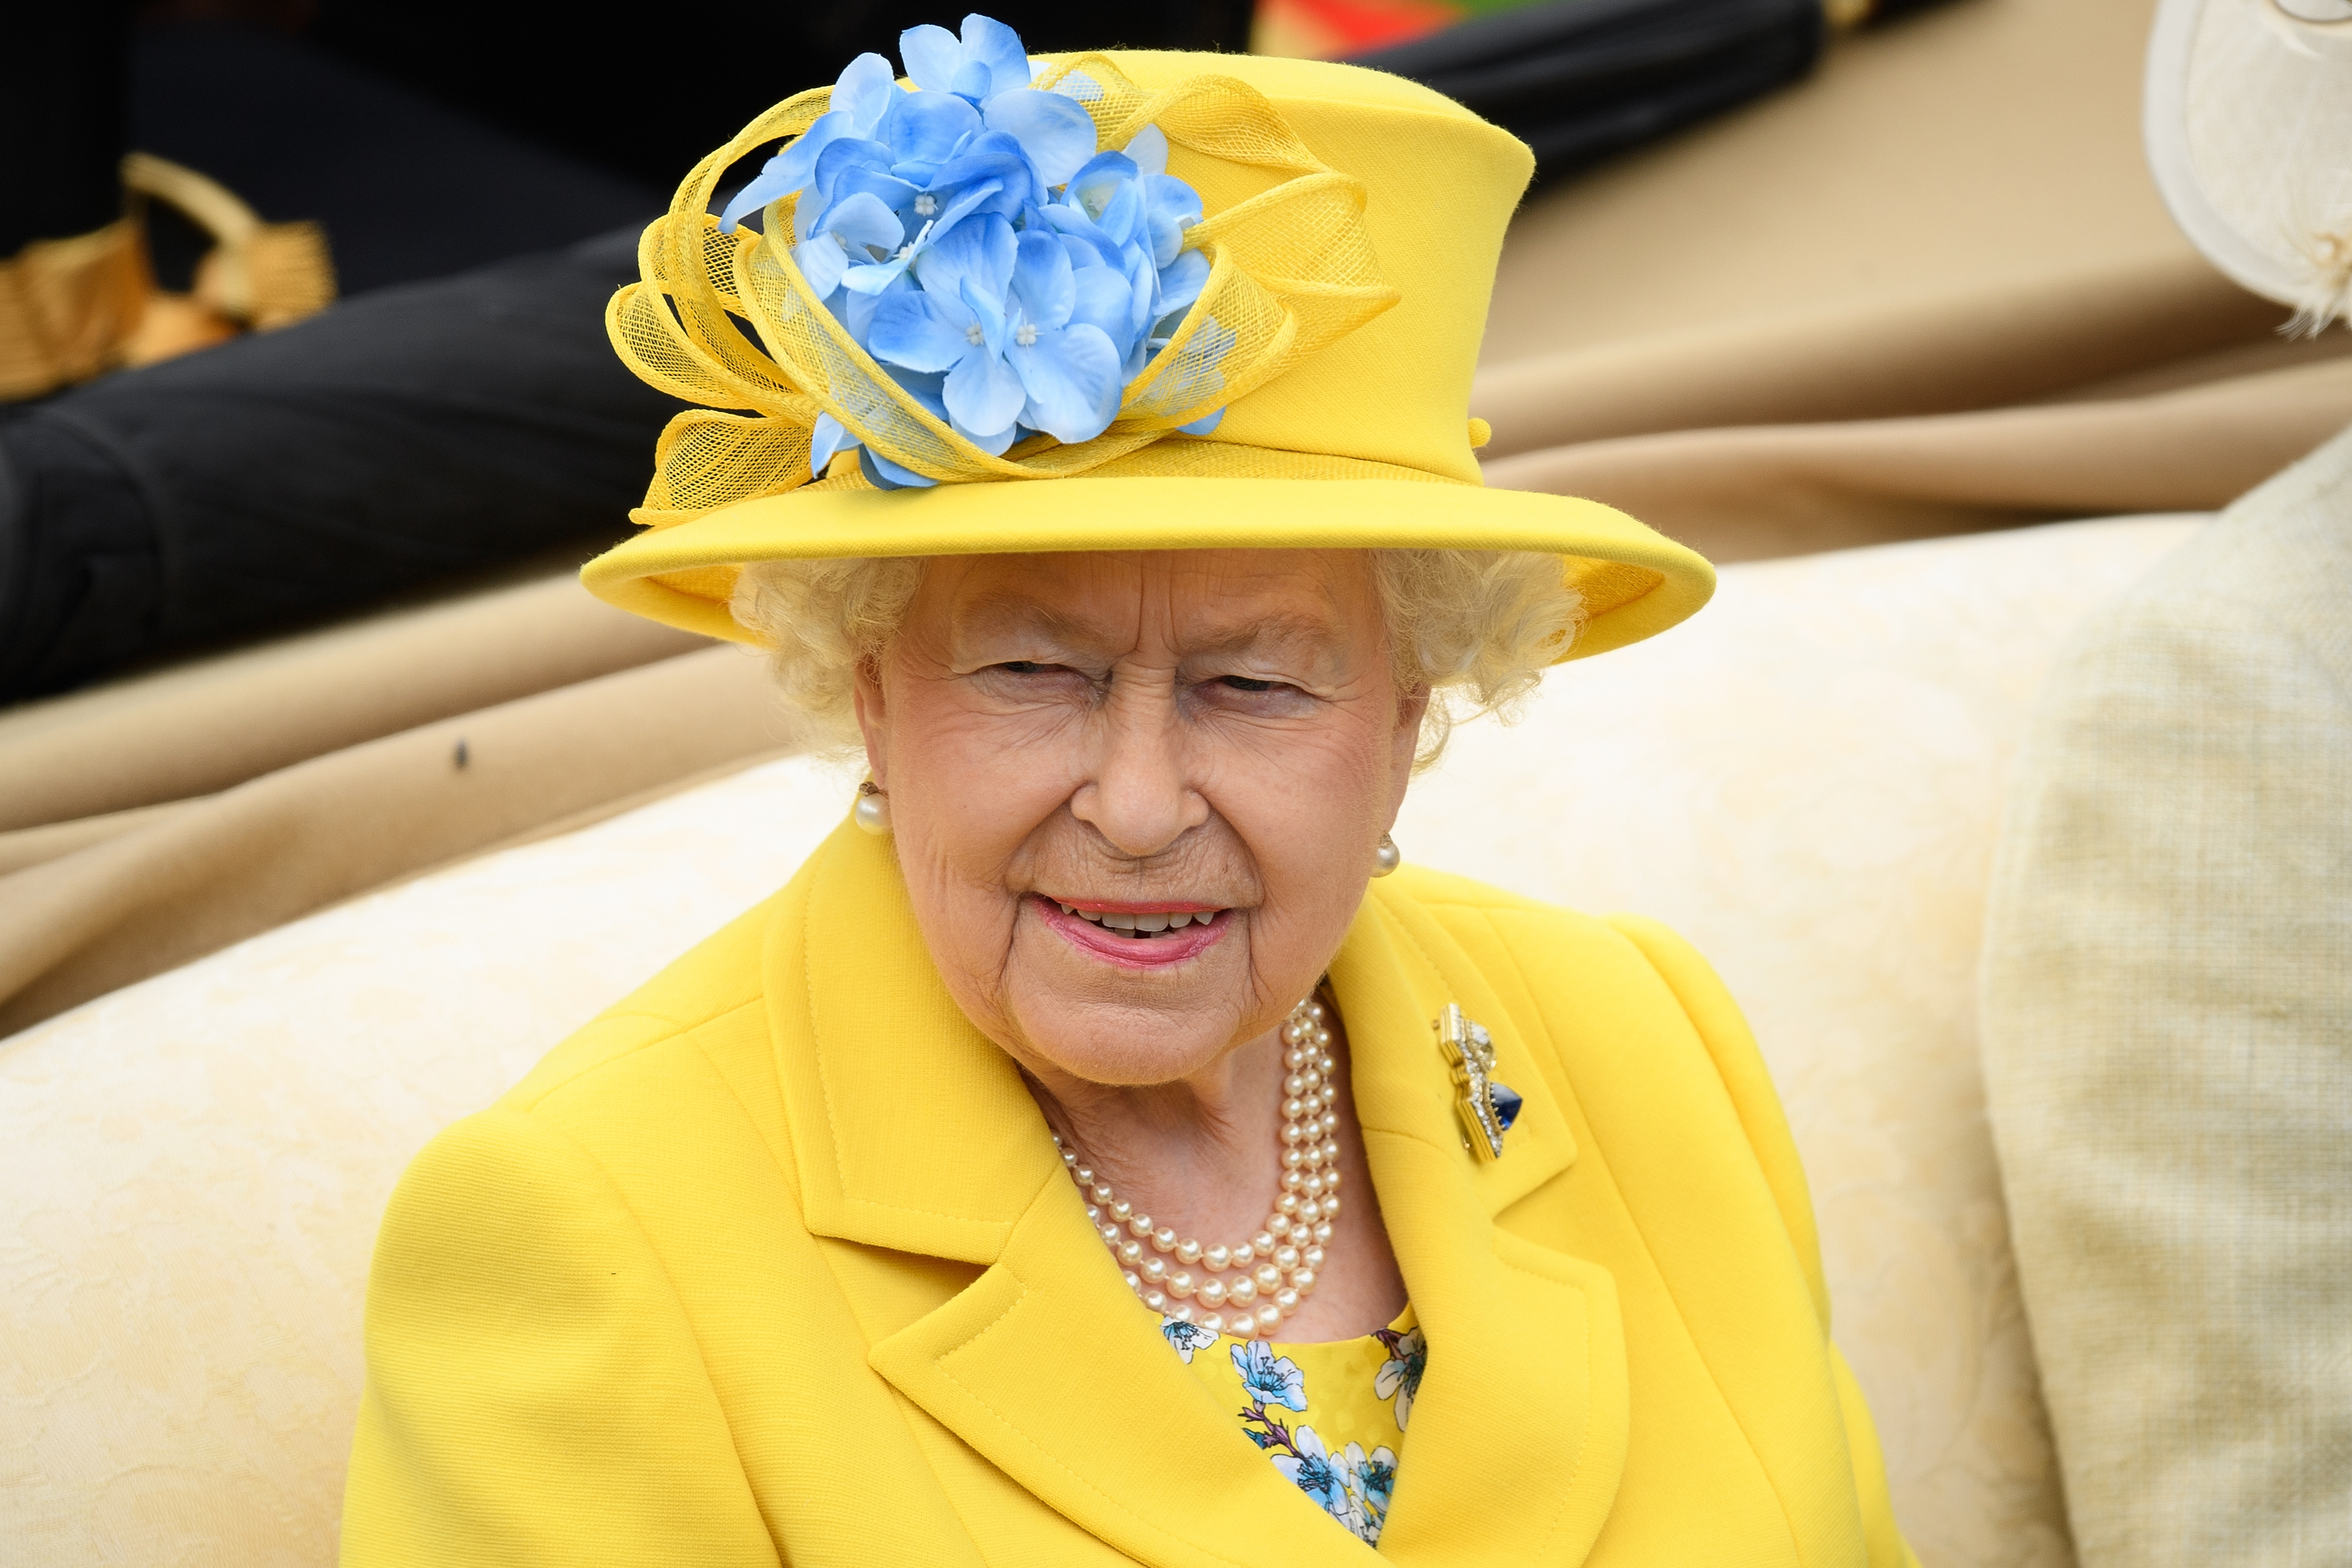 Britain's Queen Elizabeth II attends day one of Royal Ascot at Ascot Racecourse in Ascot, United Kingdom on June 19, 2018. (Leon Neal—Getty Images)